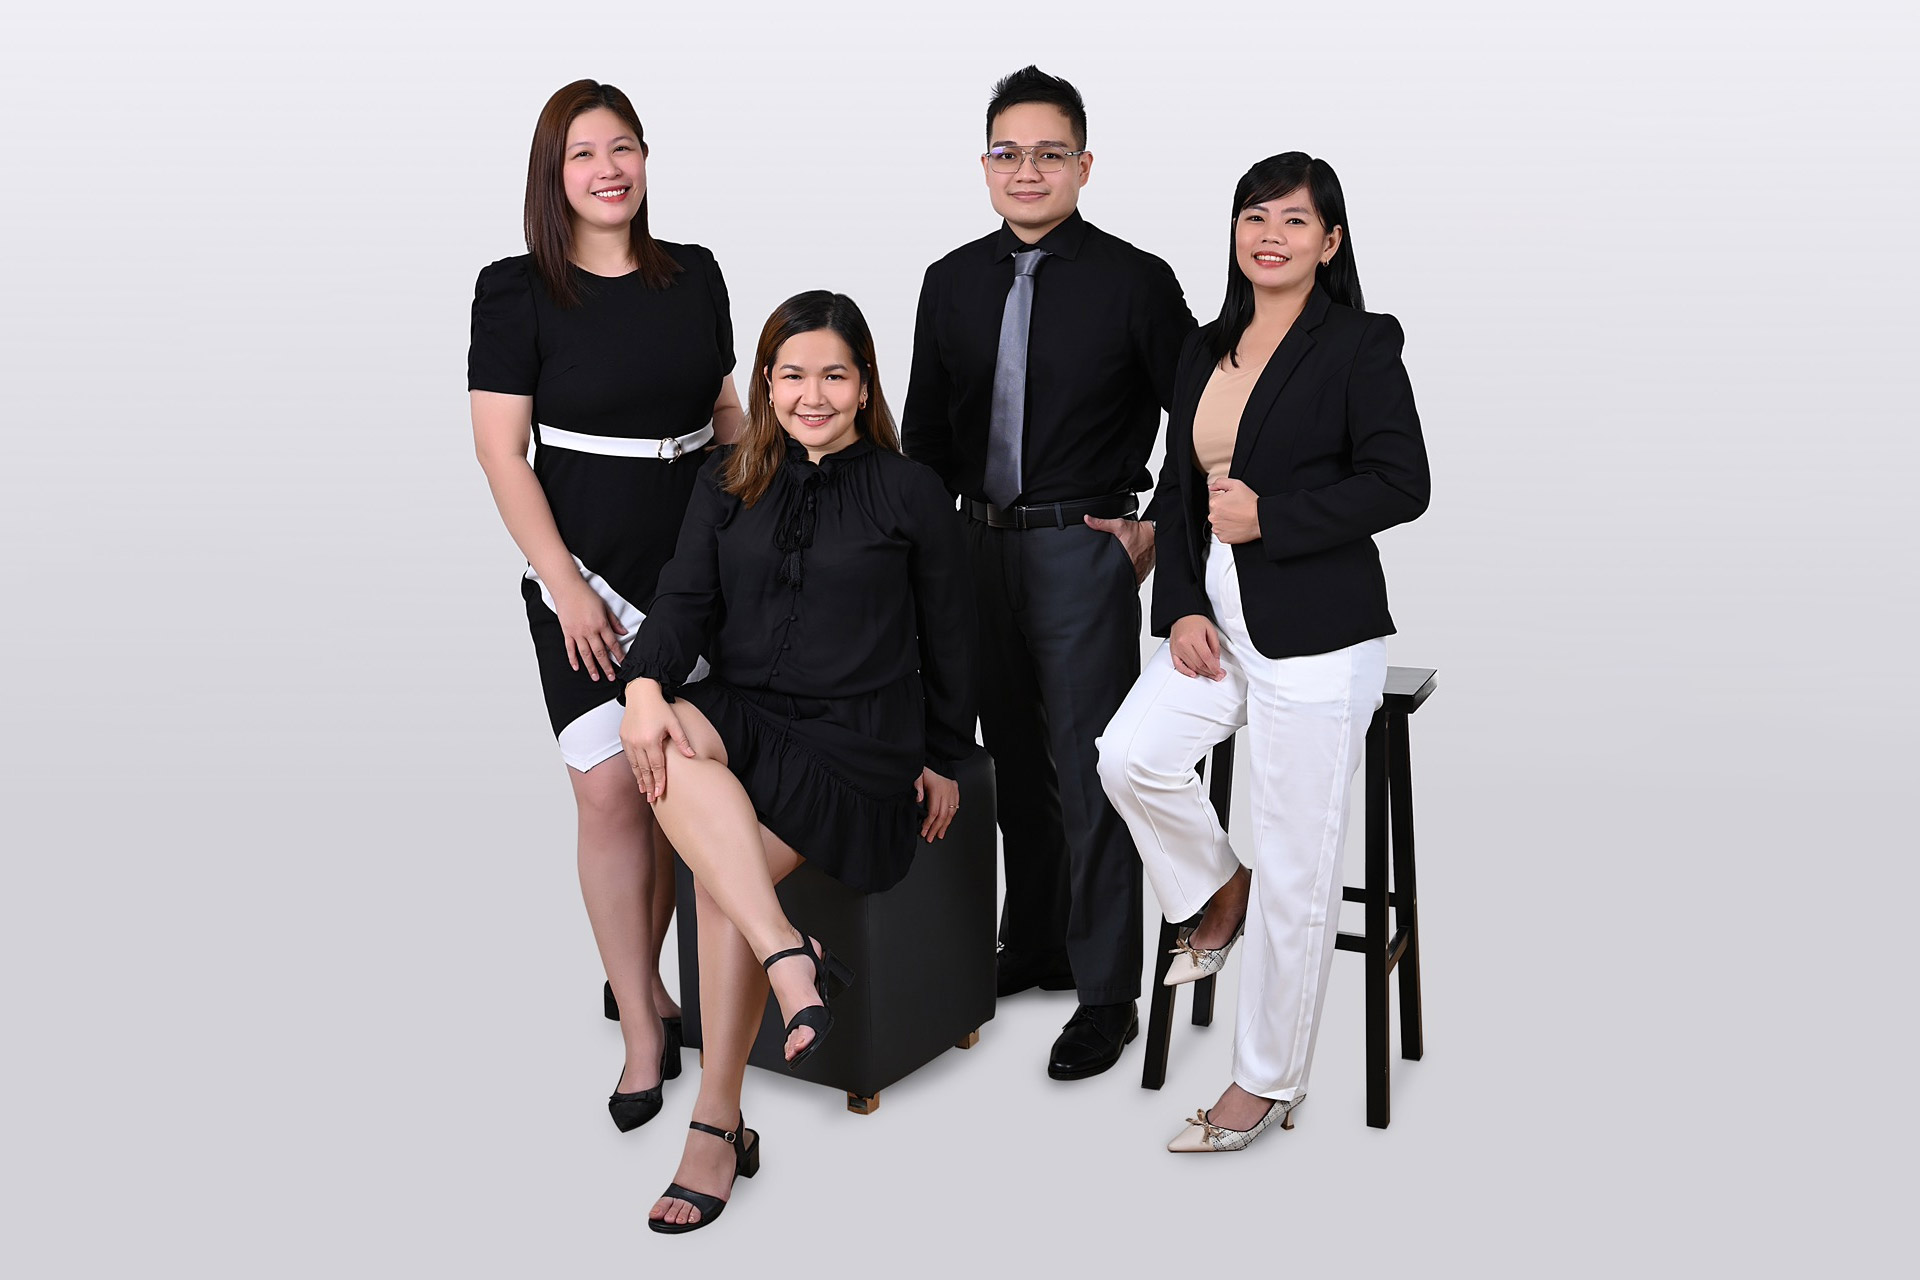 LSERV’s Legal Team Takes Center Stage: Recognized by The Legal 500